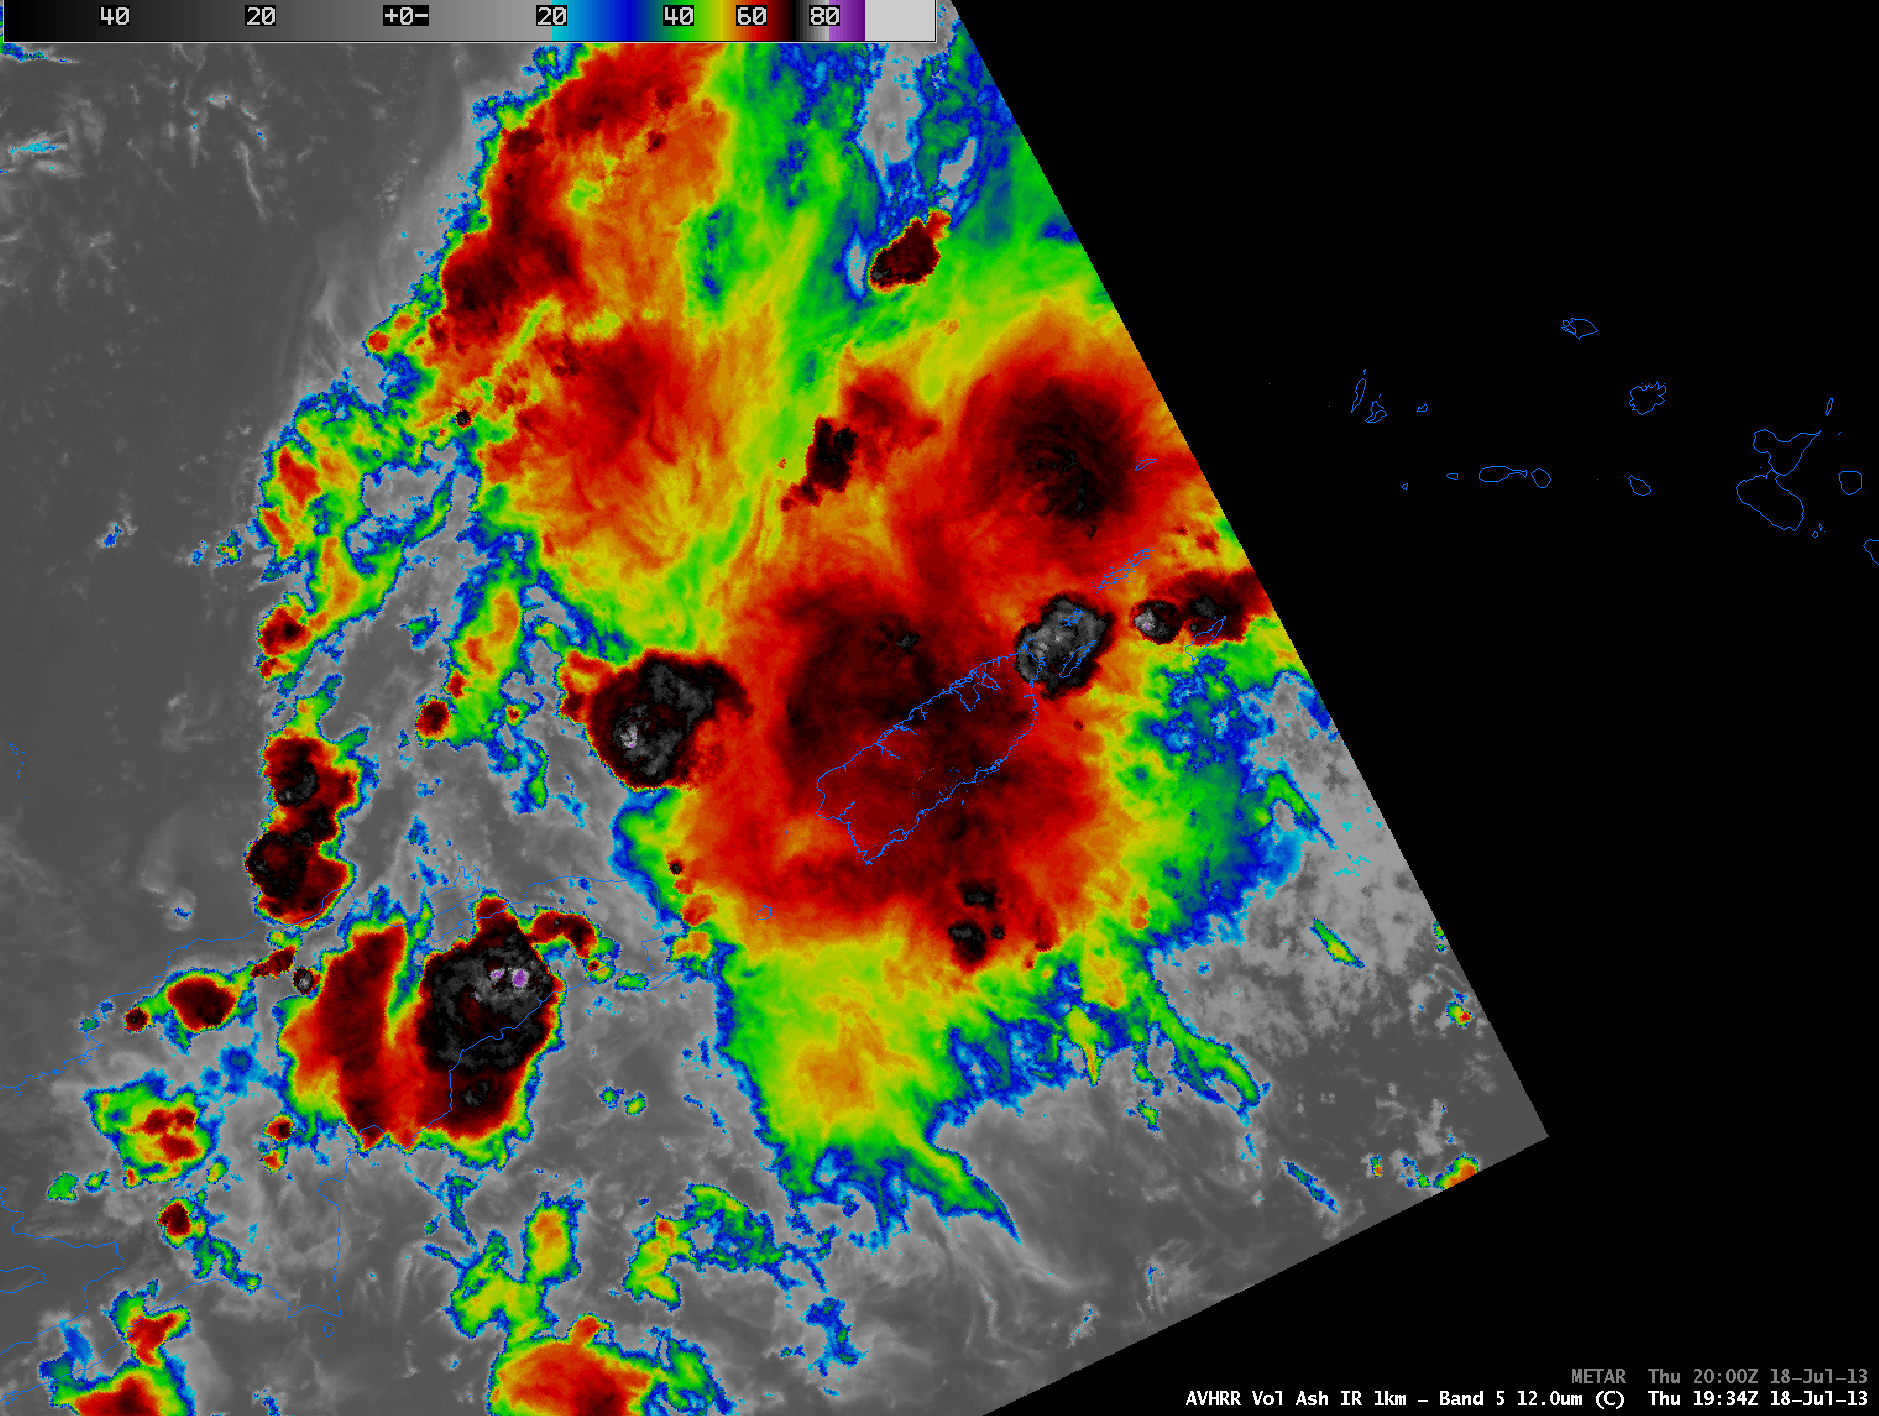 POES AVHRR 12.0 Âµm IR image (with METAR surface reports)